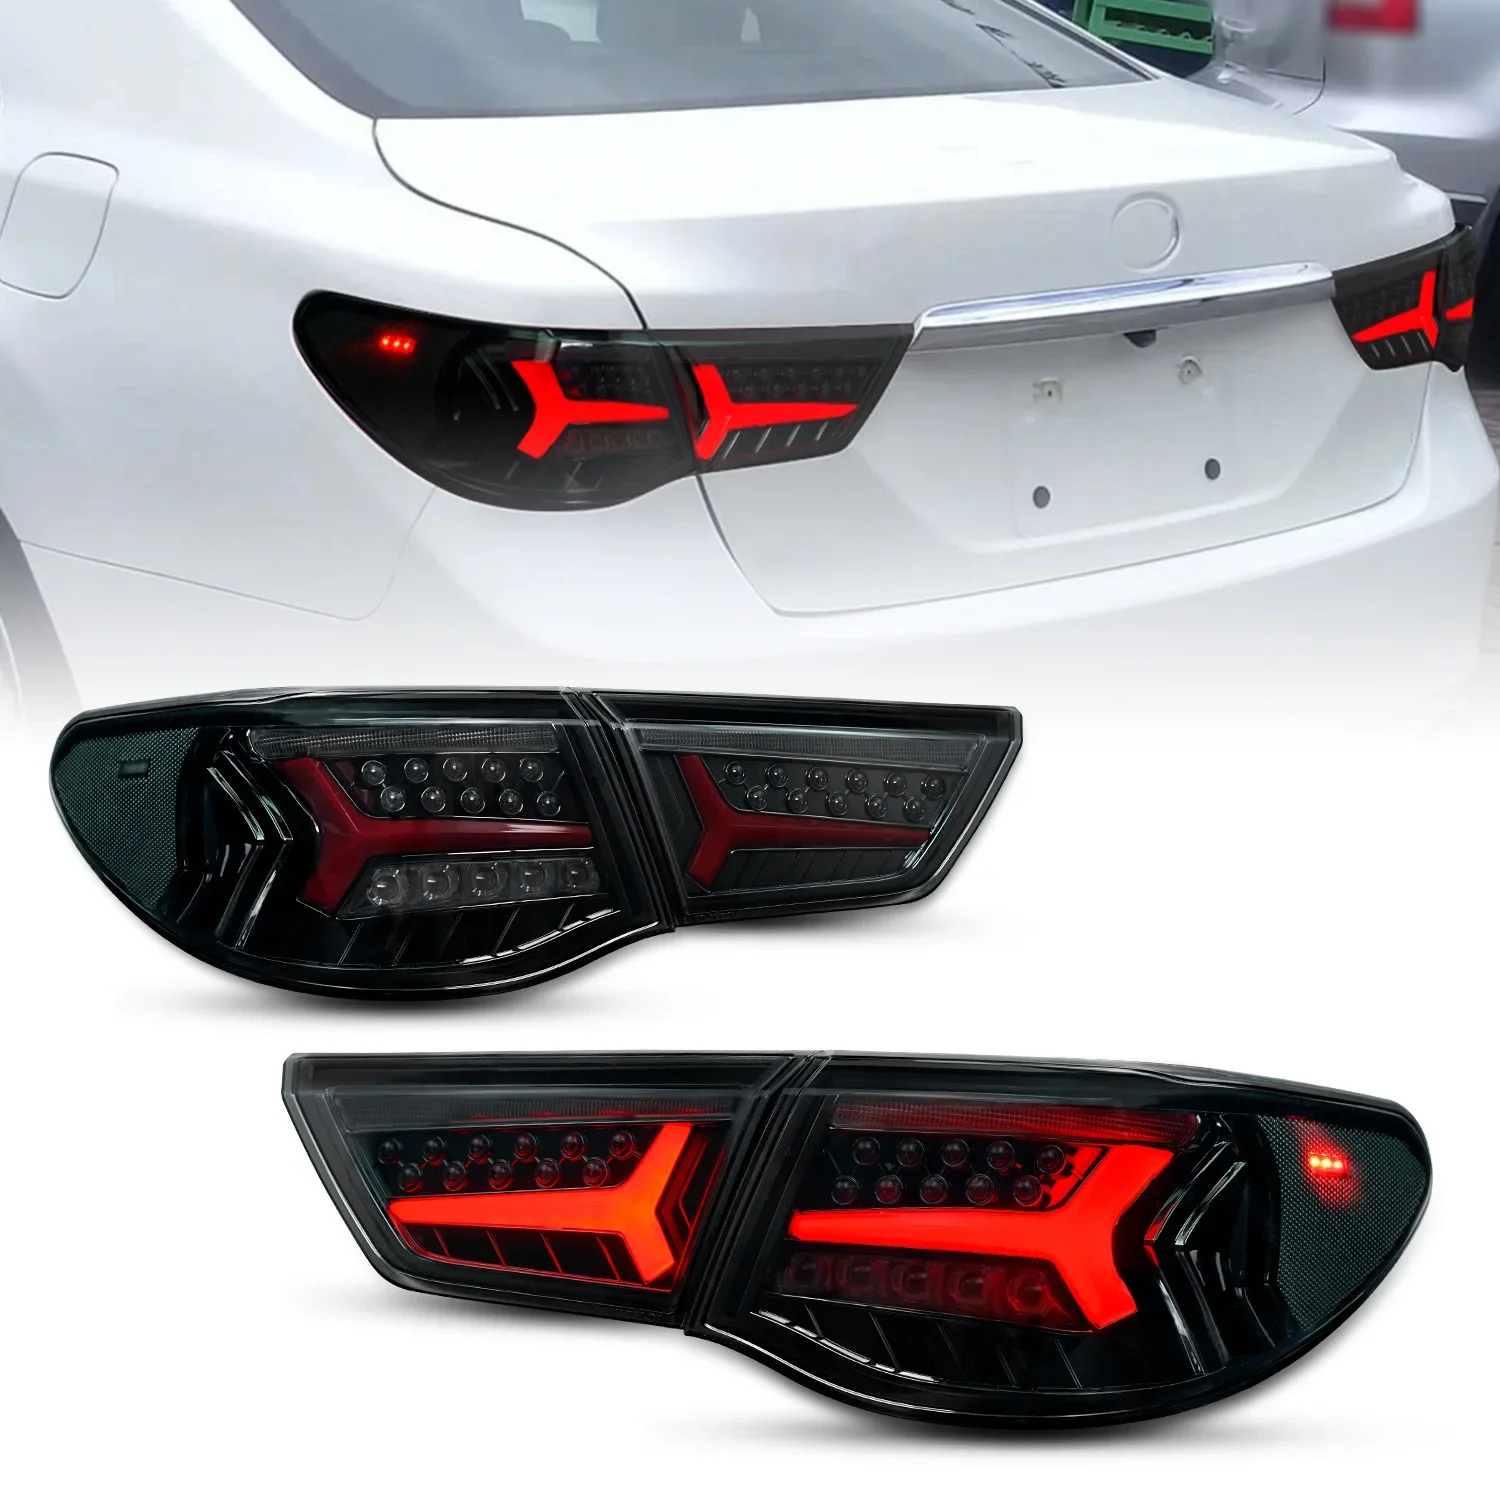 

new design Modify LED taillight for Reiz MARK X 2010 - 2013 LED Rear light with sequential turning signal